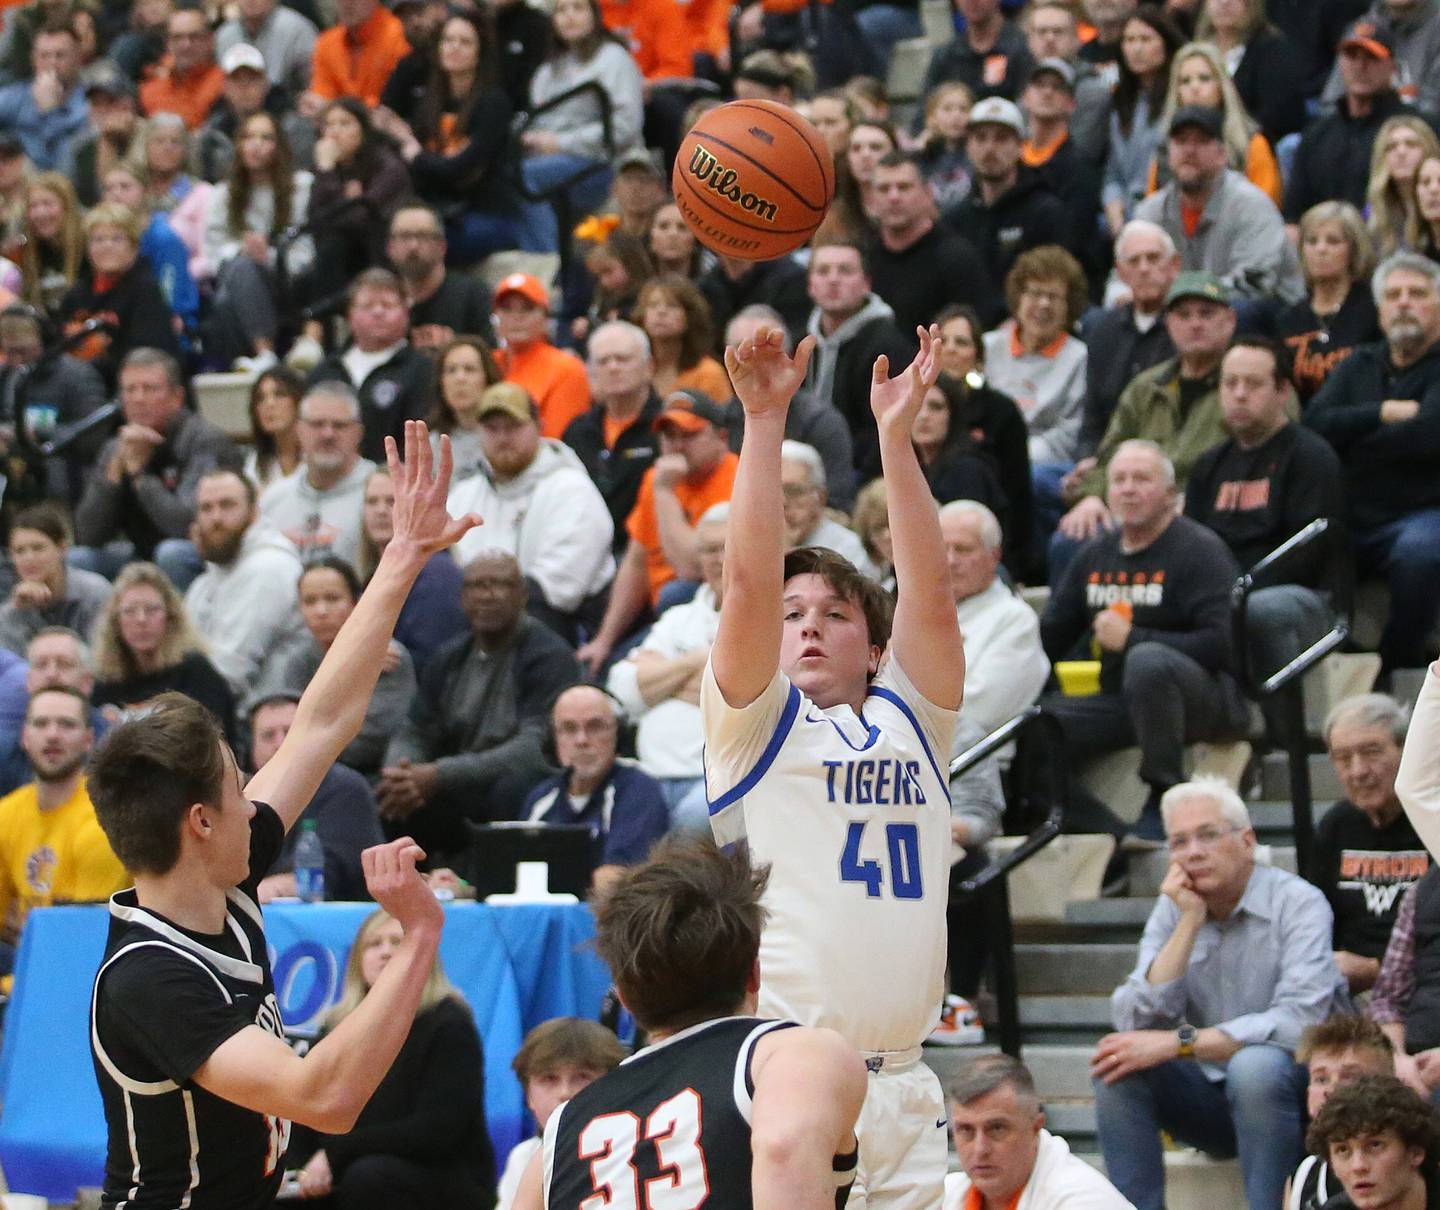 Princeton's Jordan Reinhardt shoots a shot over Byron's Ryan Tucker and Caden Considine during the Class 2A Sectional final on Friday, March 1, 2023 at Mendota High School.